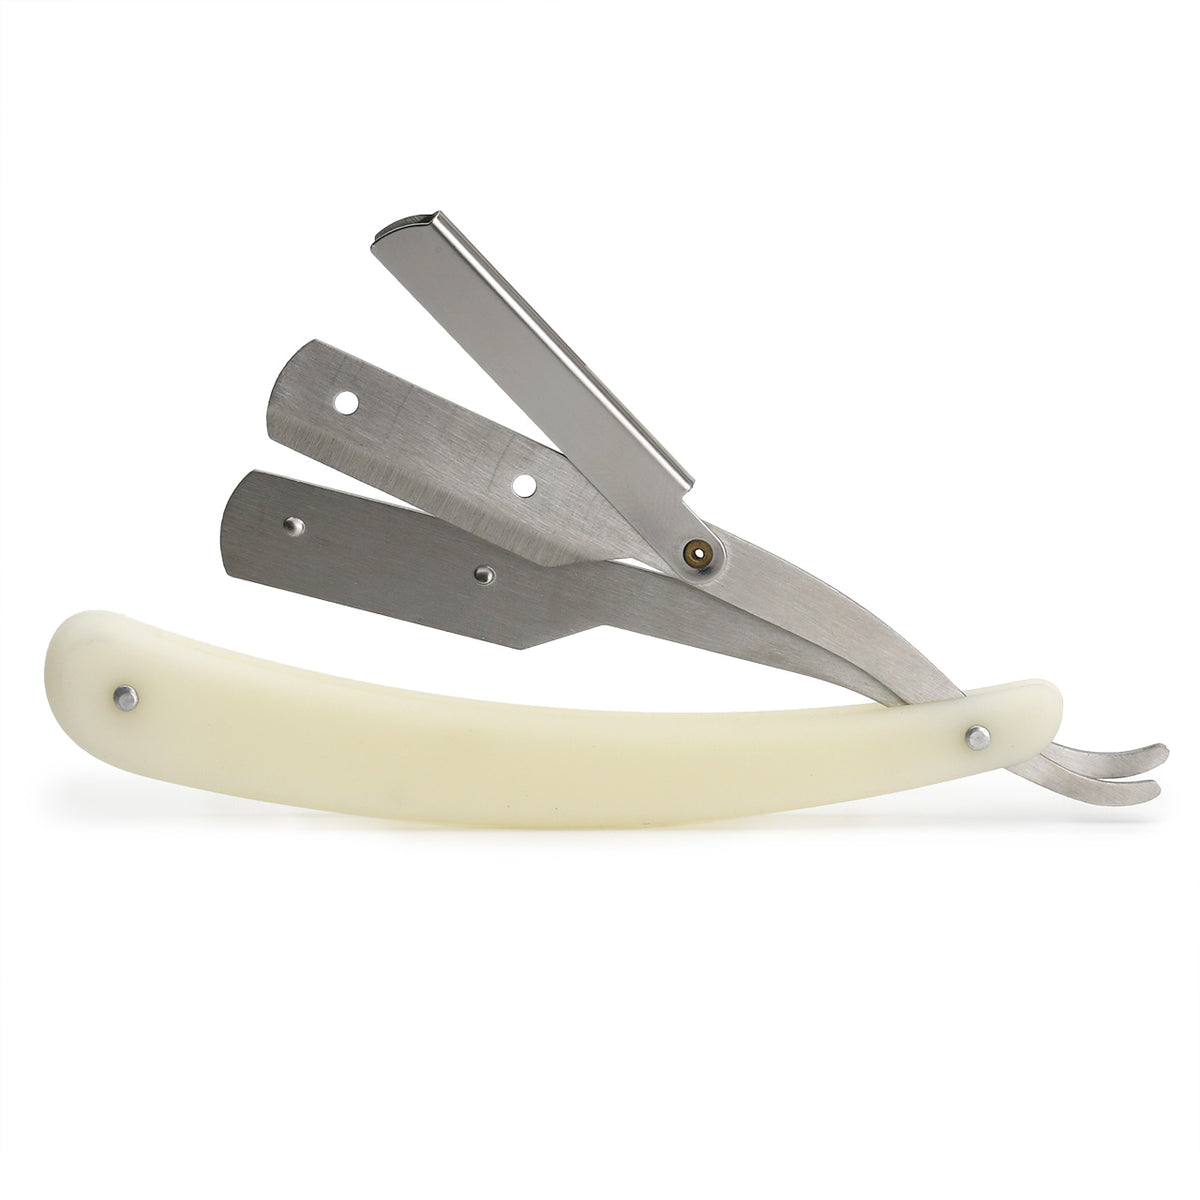 White handled shavette fully opened to show the two arms which hold the blade and the final top folding cap which firmly holds it all together 